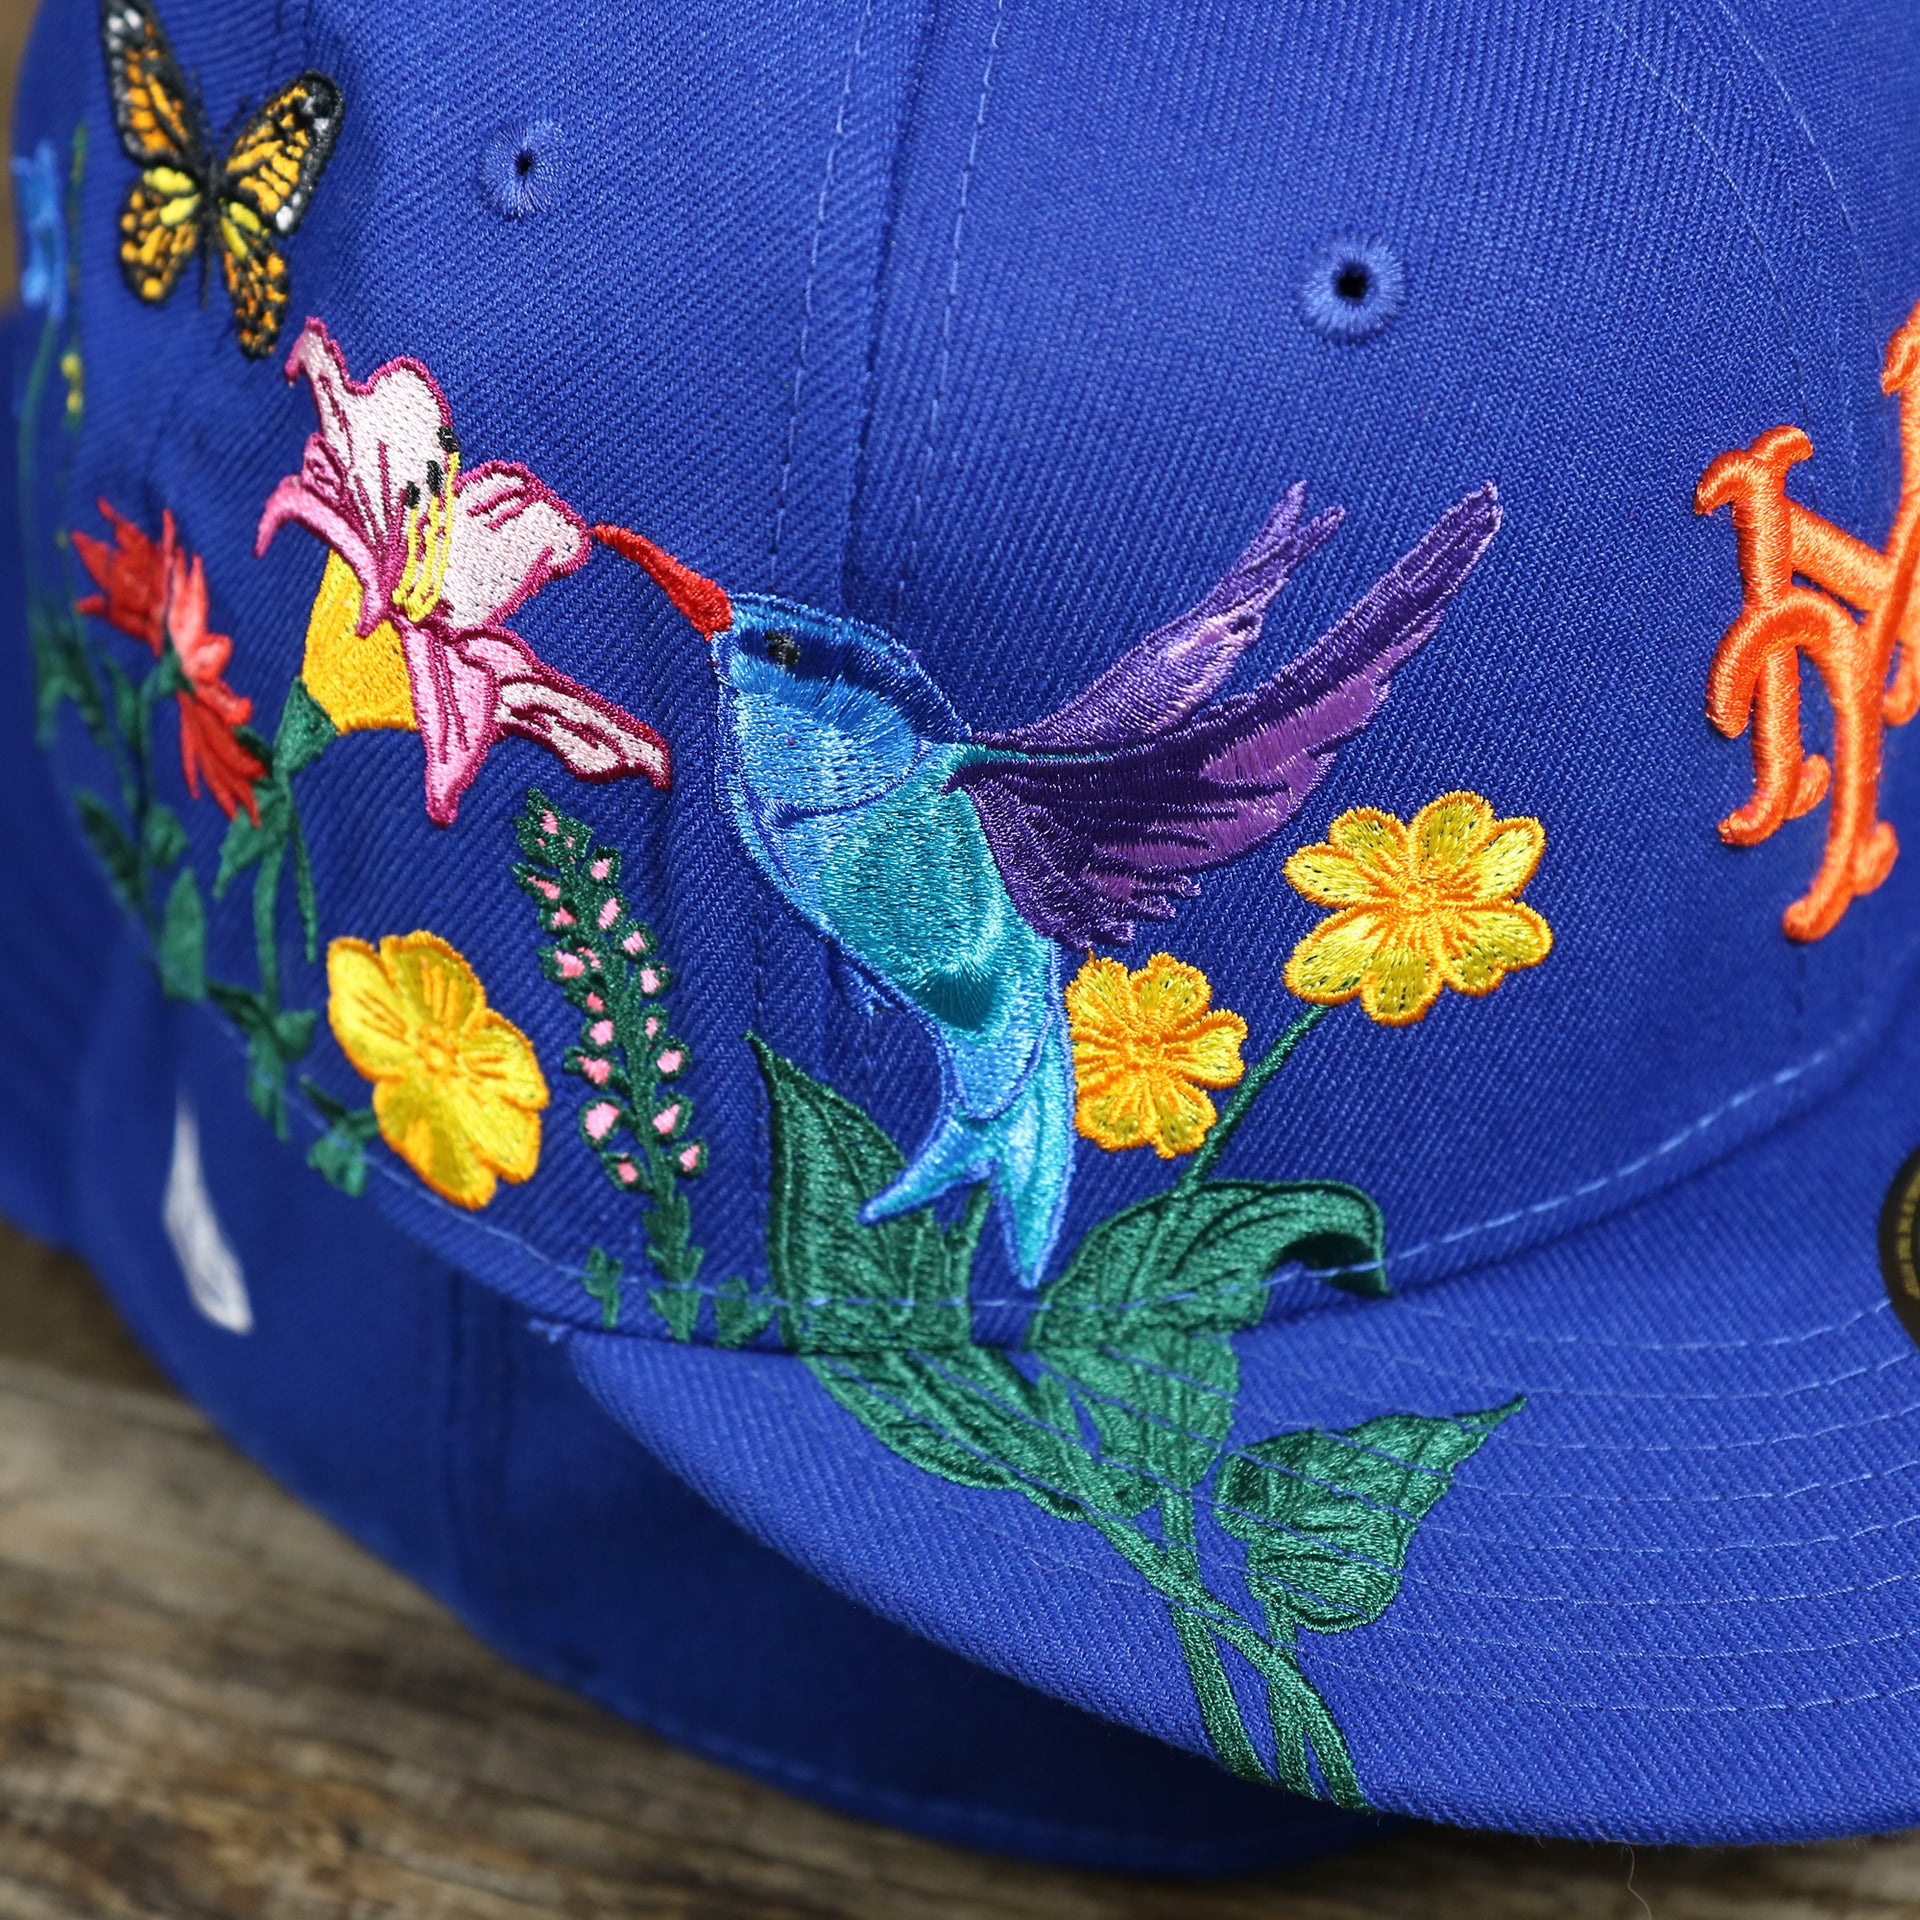 The Bloom Embroidery on the New York Mets Gray Bottom Bloom Spring Embroidery 59Fifty Fitted Cap | Royal Blue 59Fifty Cap